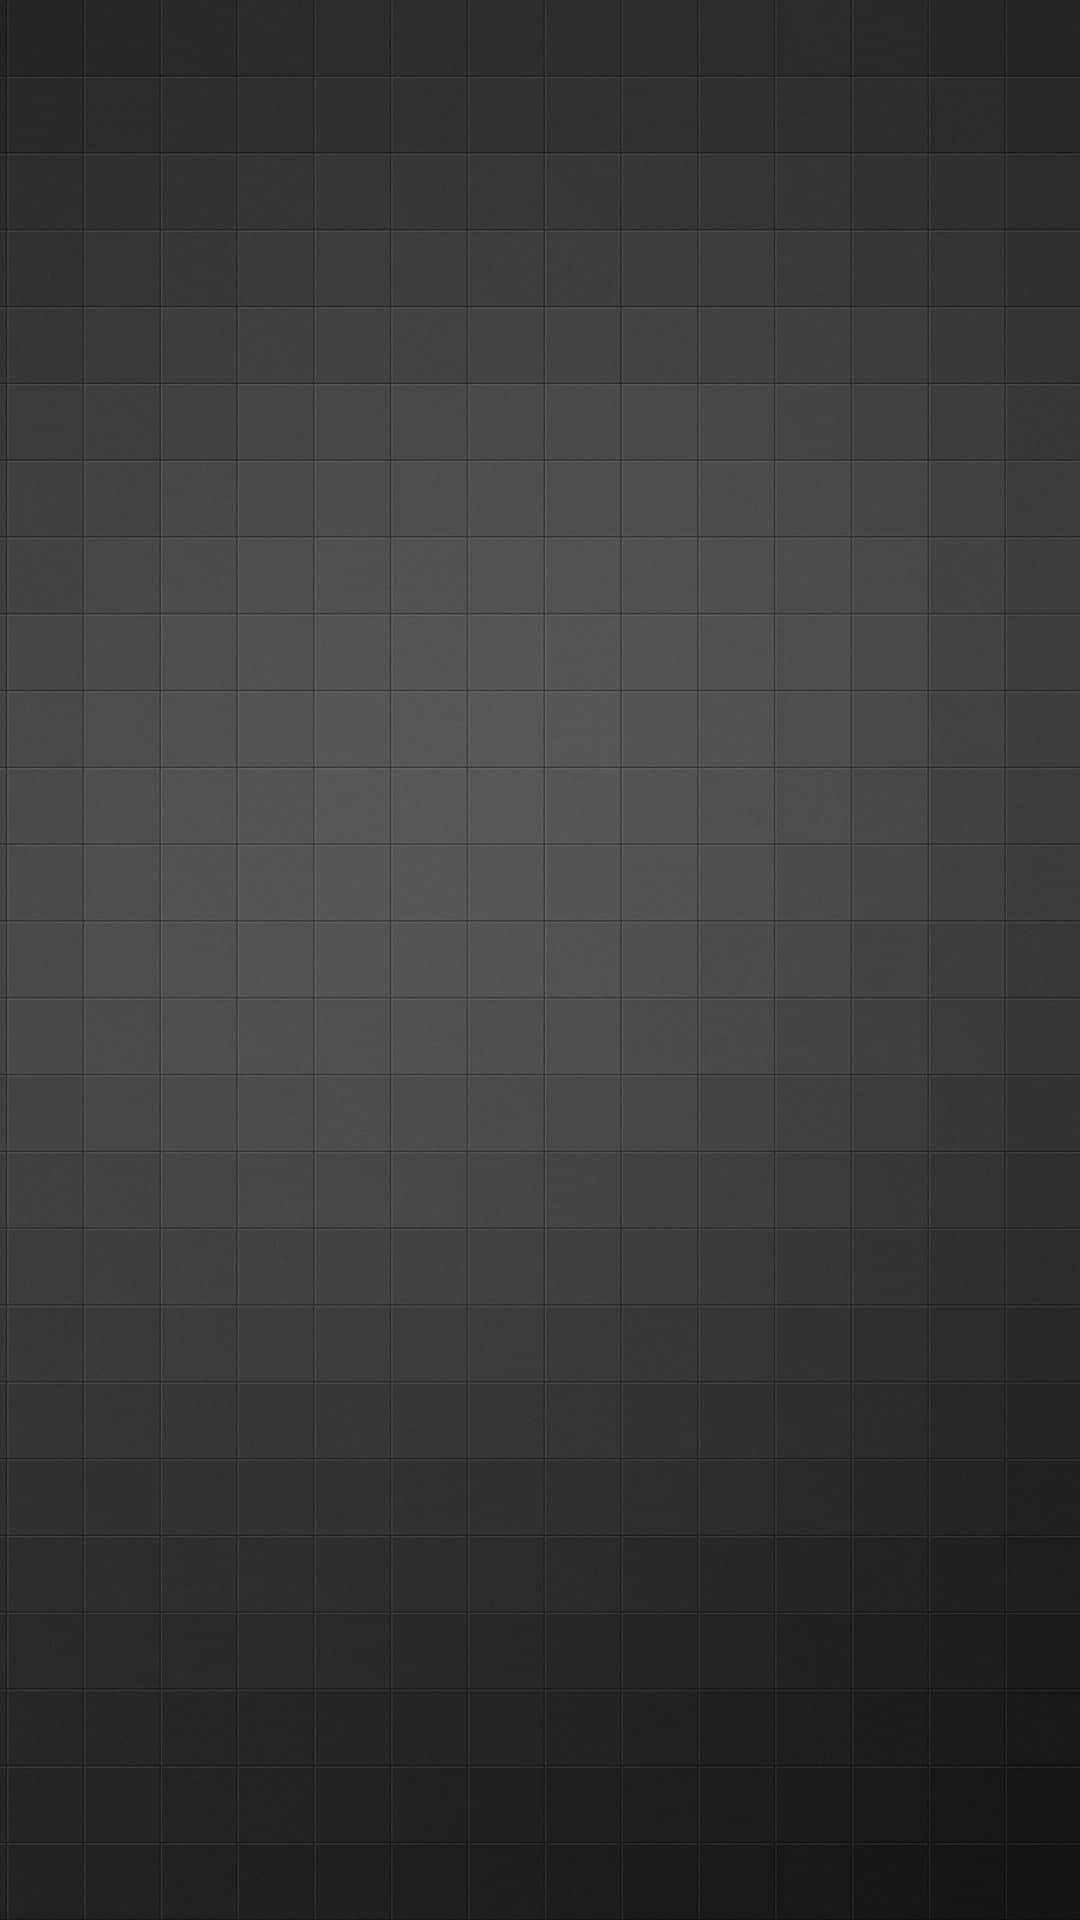 A Black Background With Squares On It